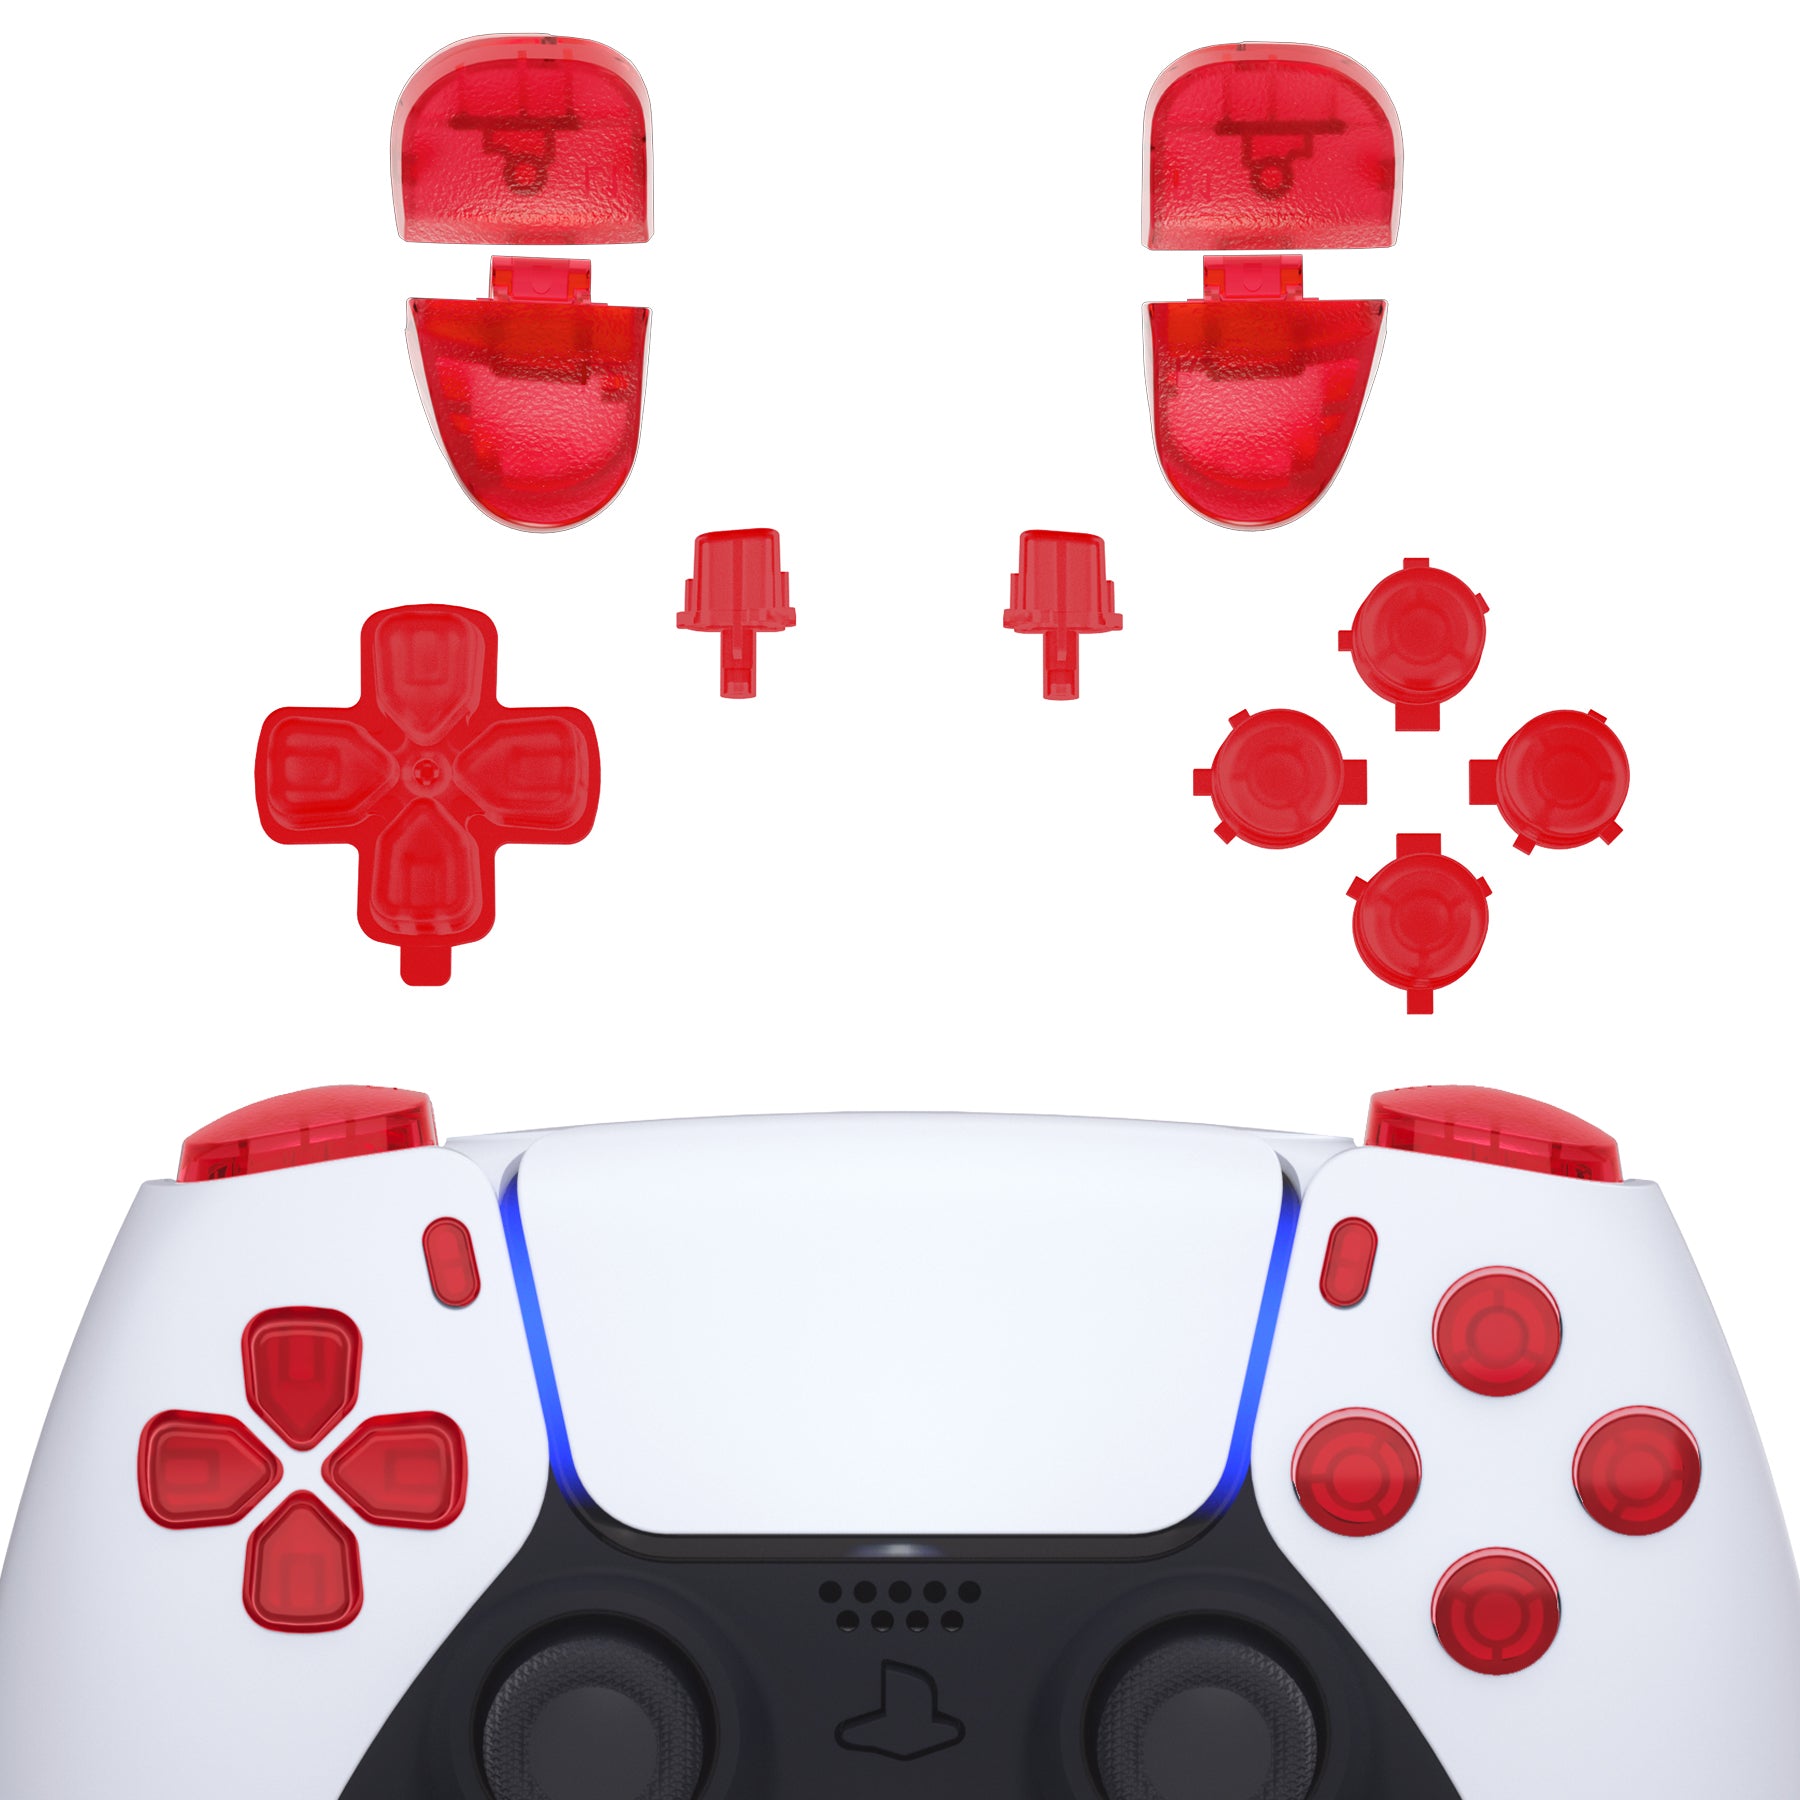 eXtremeRate Retail Replacement D-pad R1 L1 R2 L2 Triggers Share Options Face Buttons, Clear Red Full Set Buttons Compatible with ps5 Controller BDM-030 - JPF3002G3